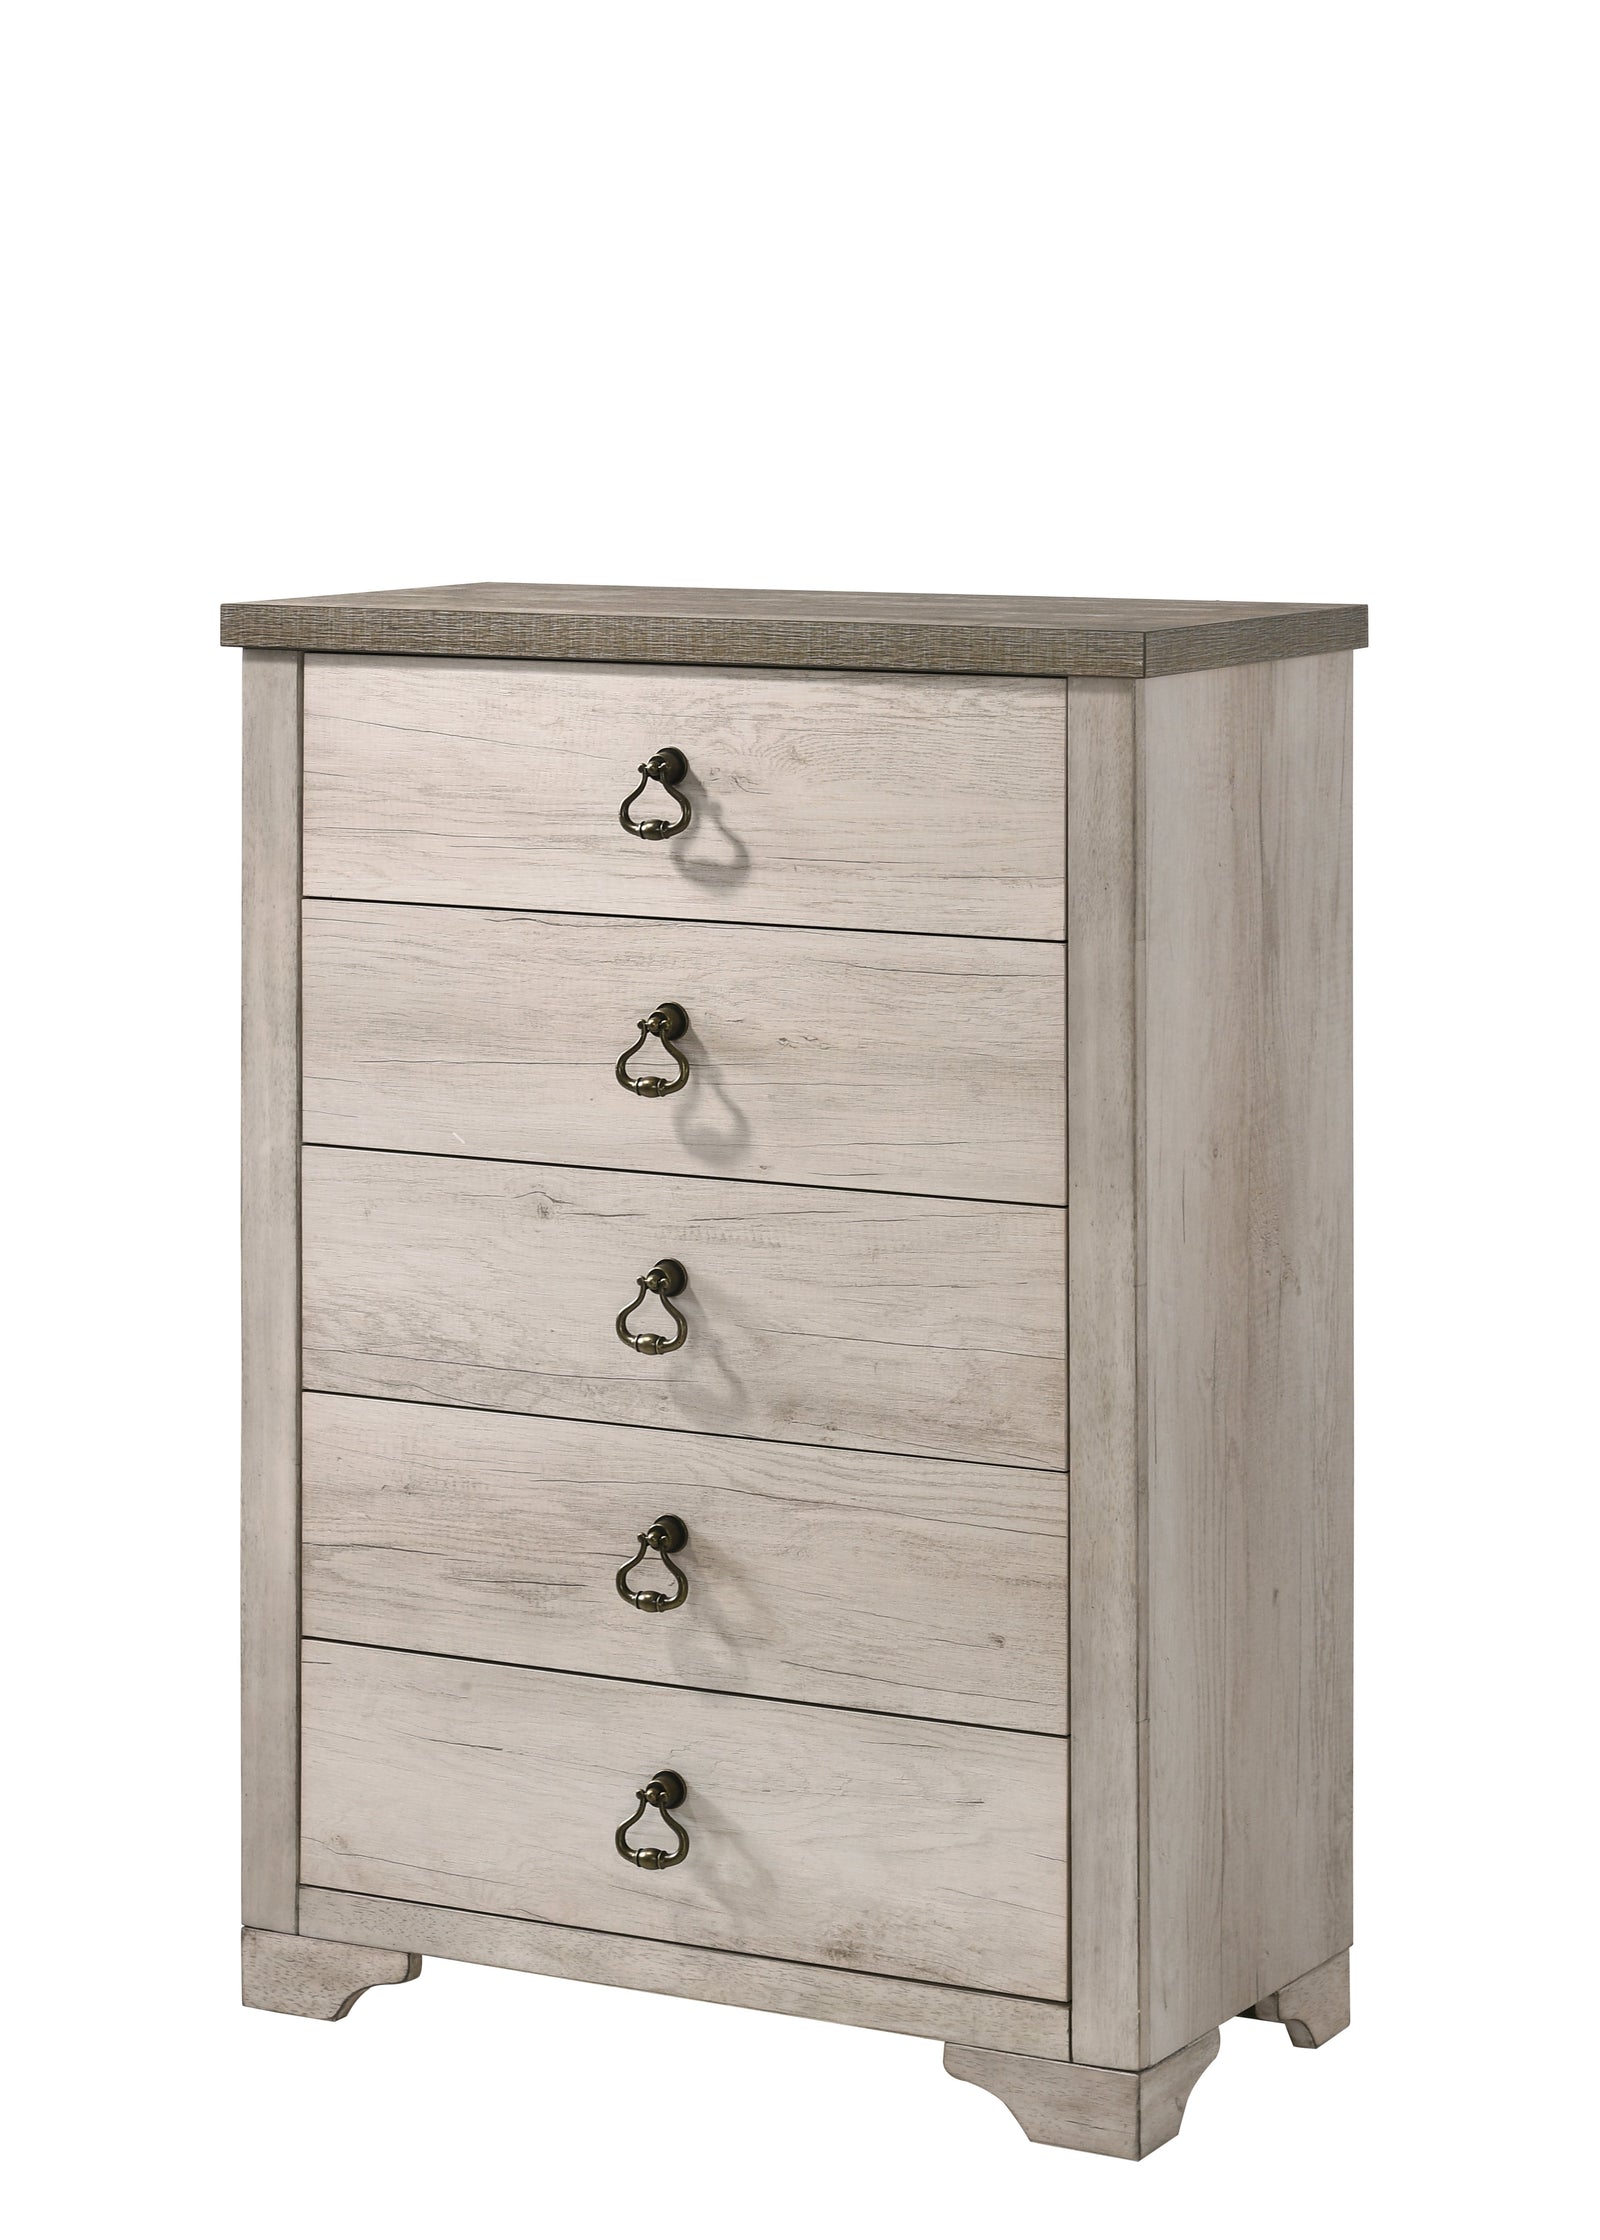 Patterson Chest Driftwood, Modern Sturdy Wood, Ring Metal Knob 5 Drawers